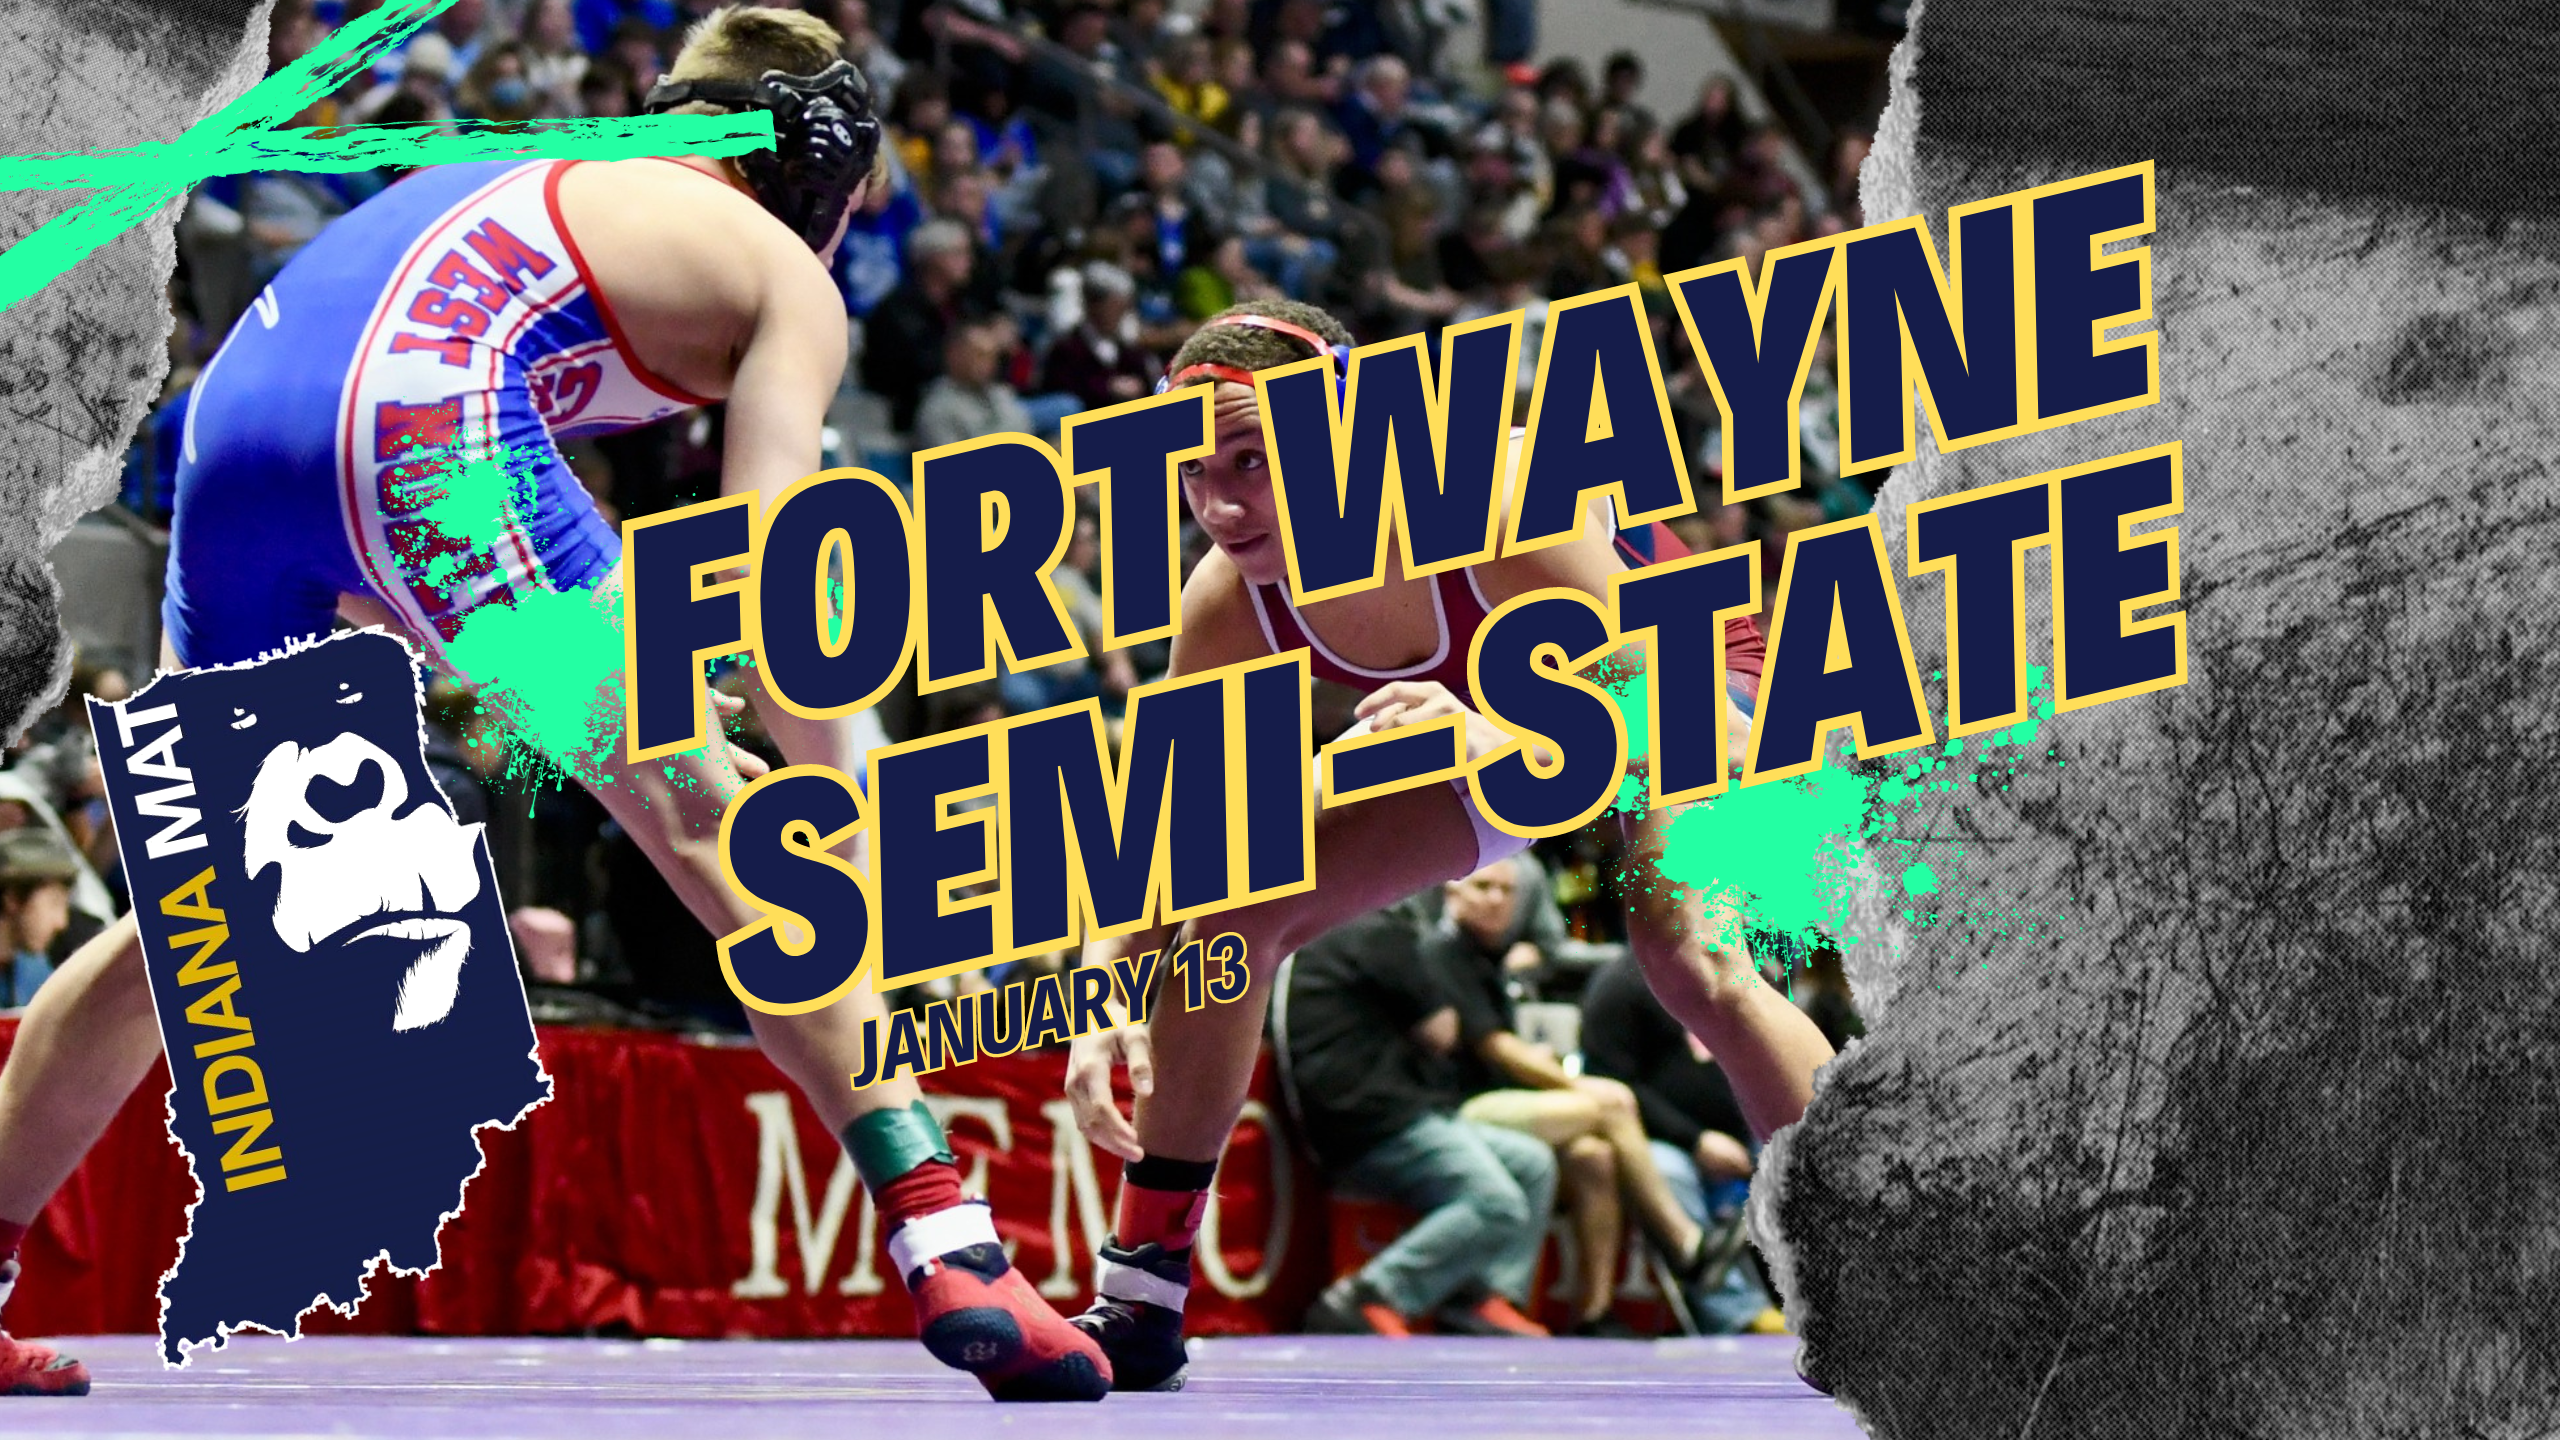 More information about "Fort Wayne #6"